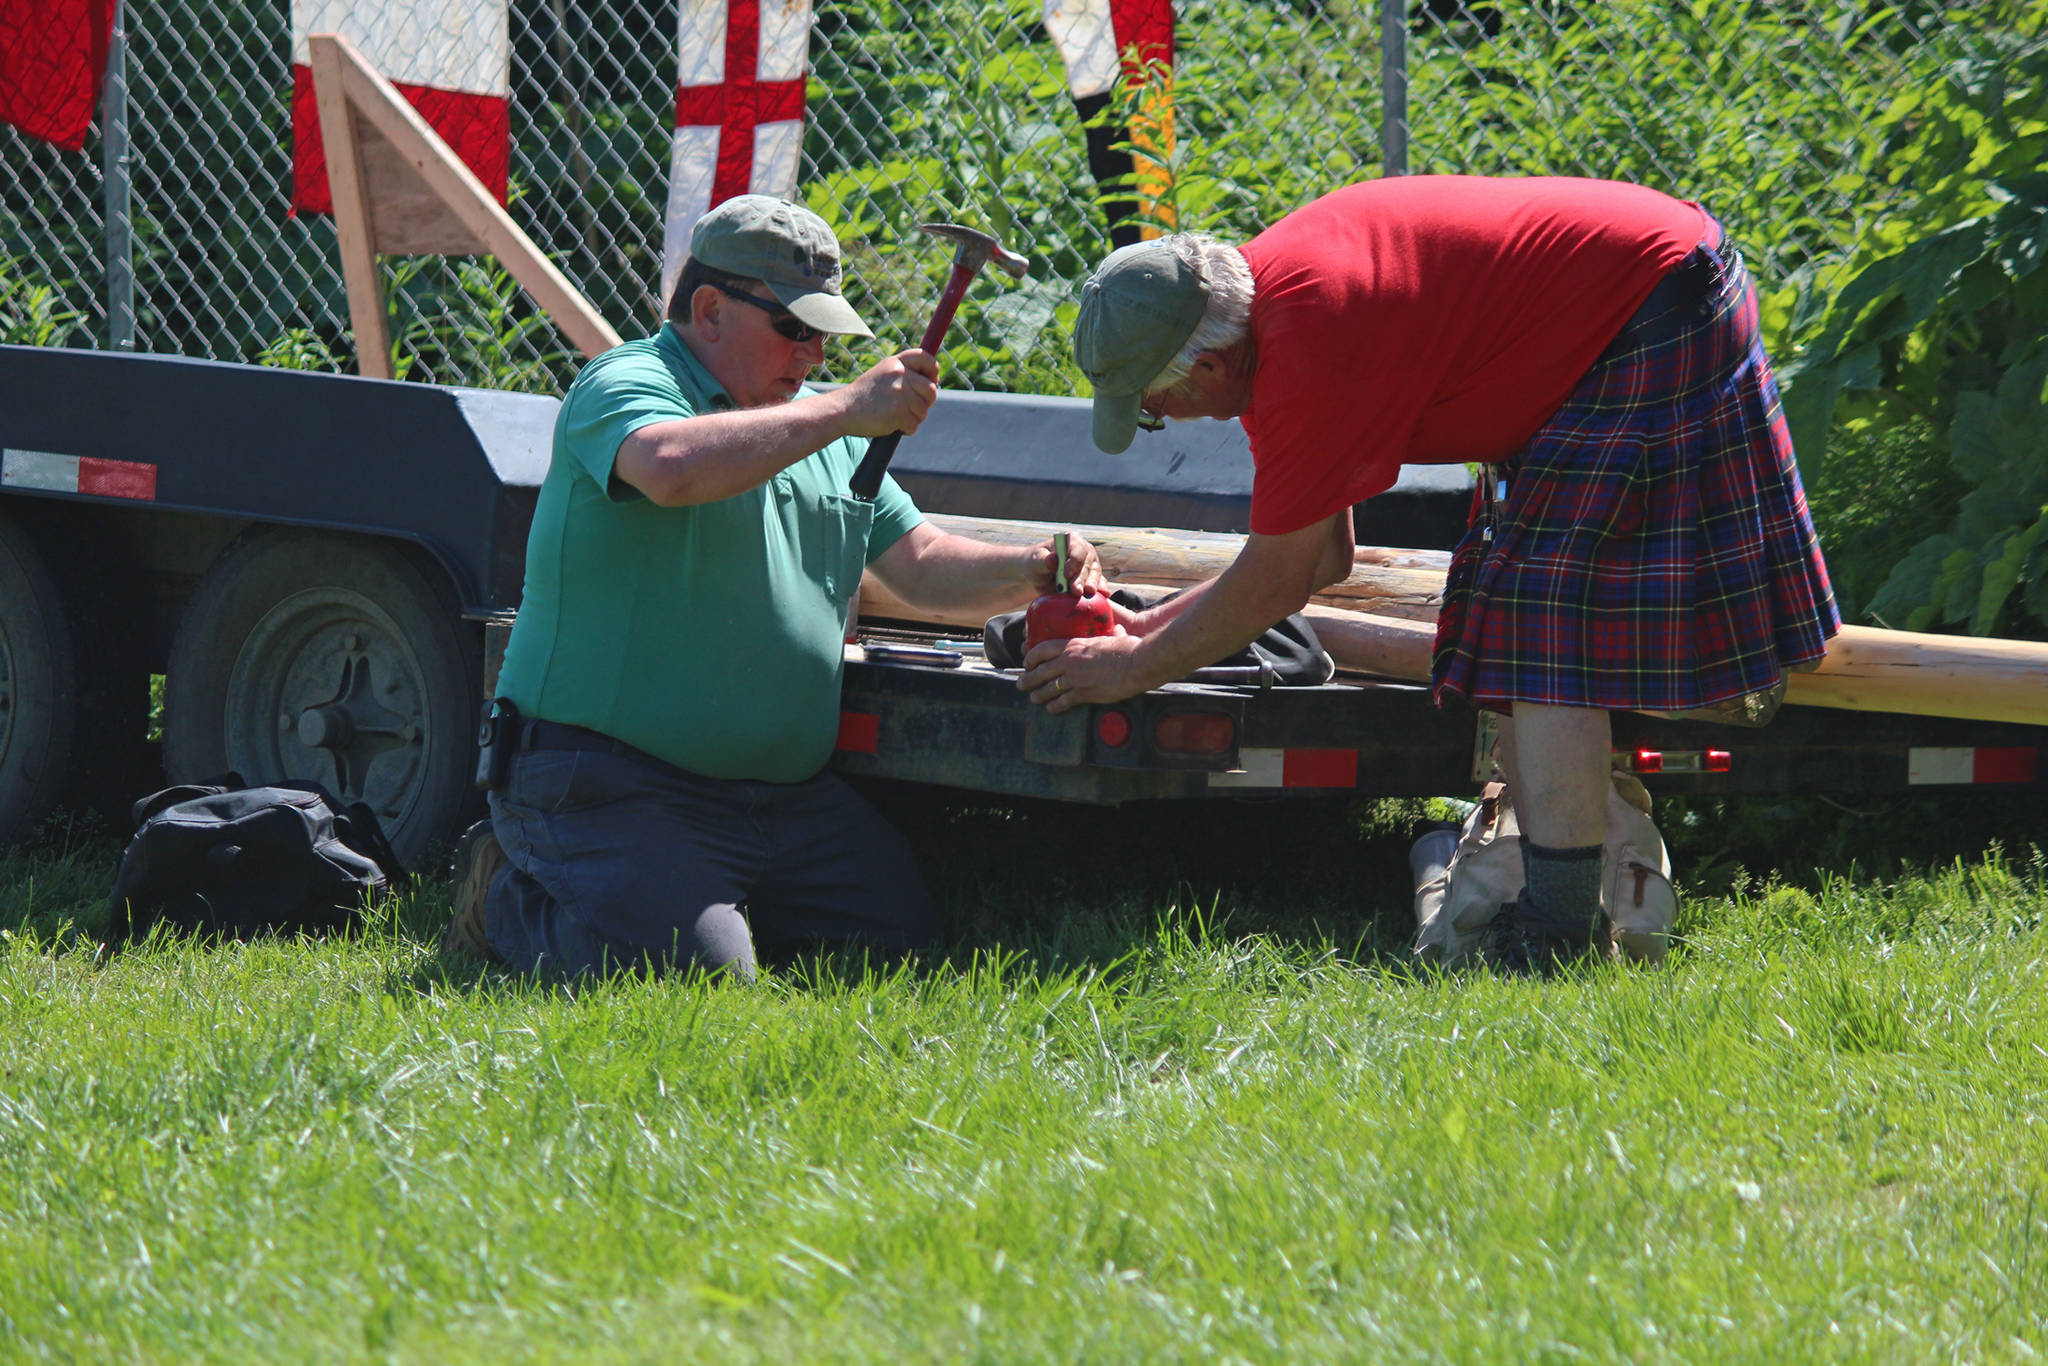 Kachemak Bay Scottish Club President Robert Archibald (right) and another volunteer repair a hammer that was broken during the hammer throw events of this year’s Kachemak Bay Scottish Highland Games on Saturday, July 7, 2018 at Karen Hornaday Park in Homer, Alaska. The hammer was repaired and the competition was able to continue. (Photo by Megan Pacer/Homer News)